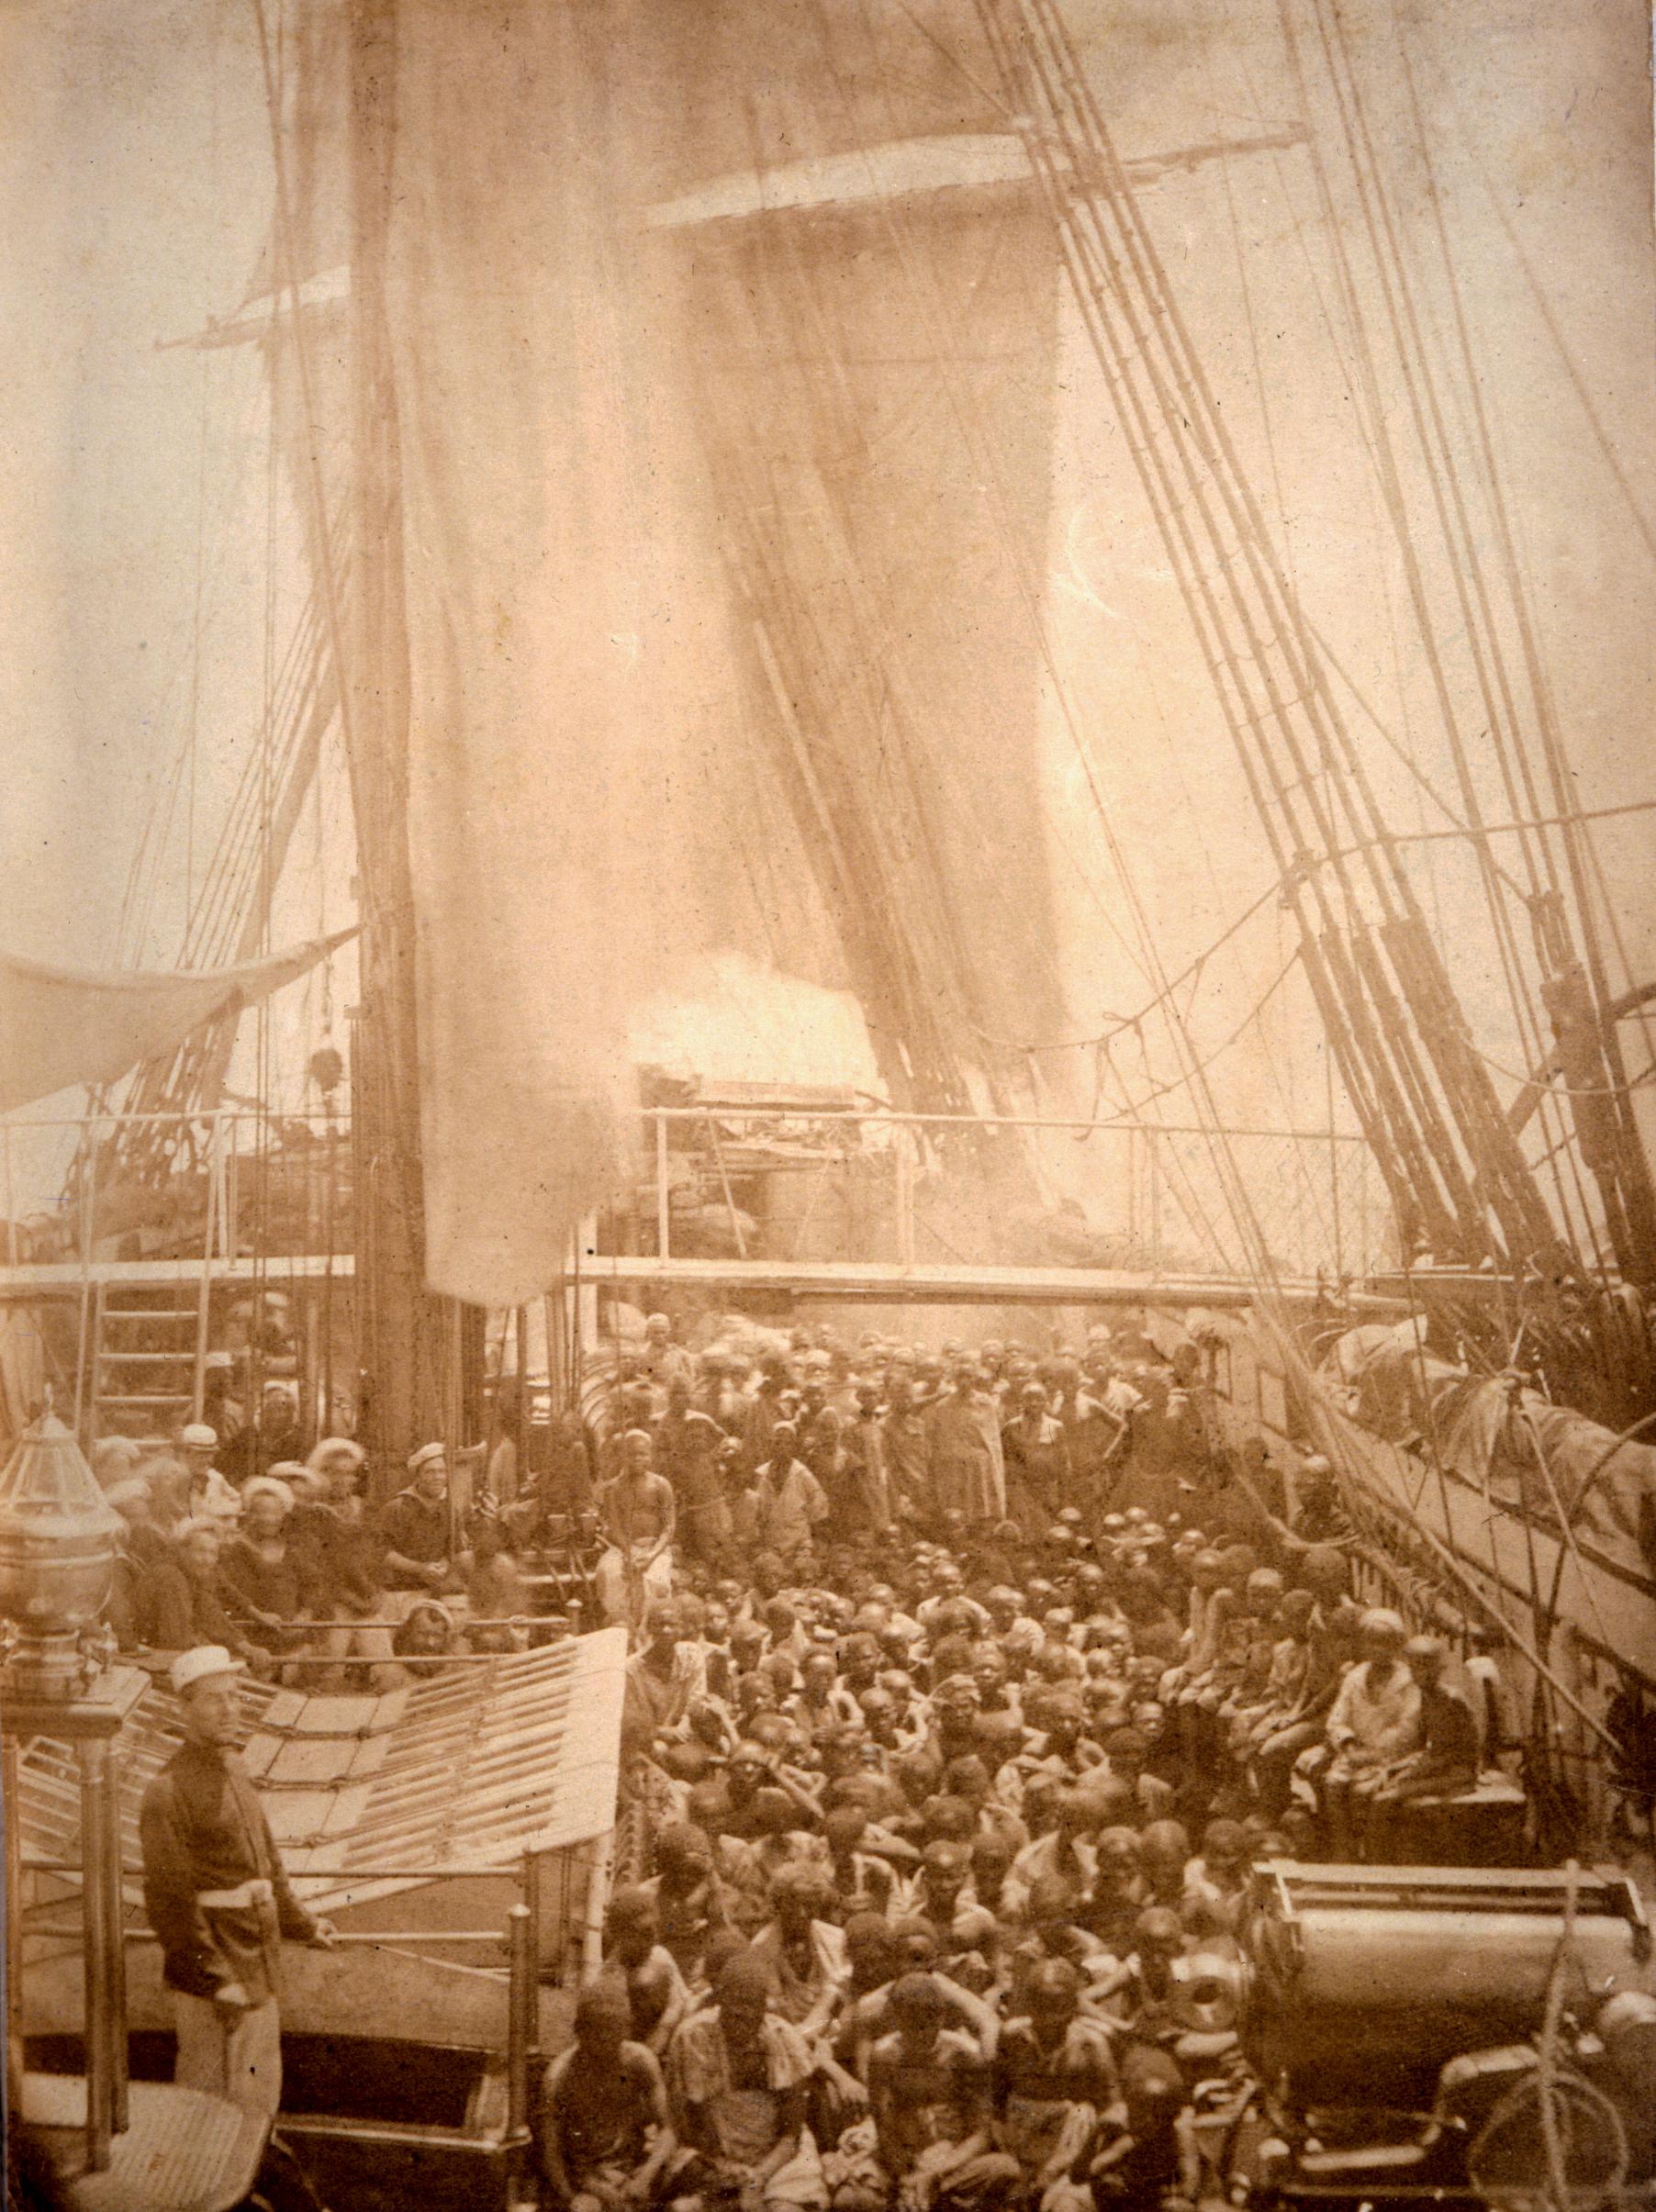 Sepia-toned photograph showing a large group of enslaved people, both adults and children, sitting and standing on the deck of a wooden ship facing the camera. A group of white sailors stand to the left.